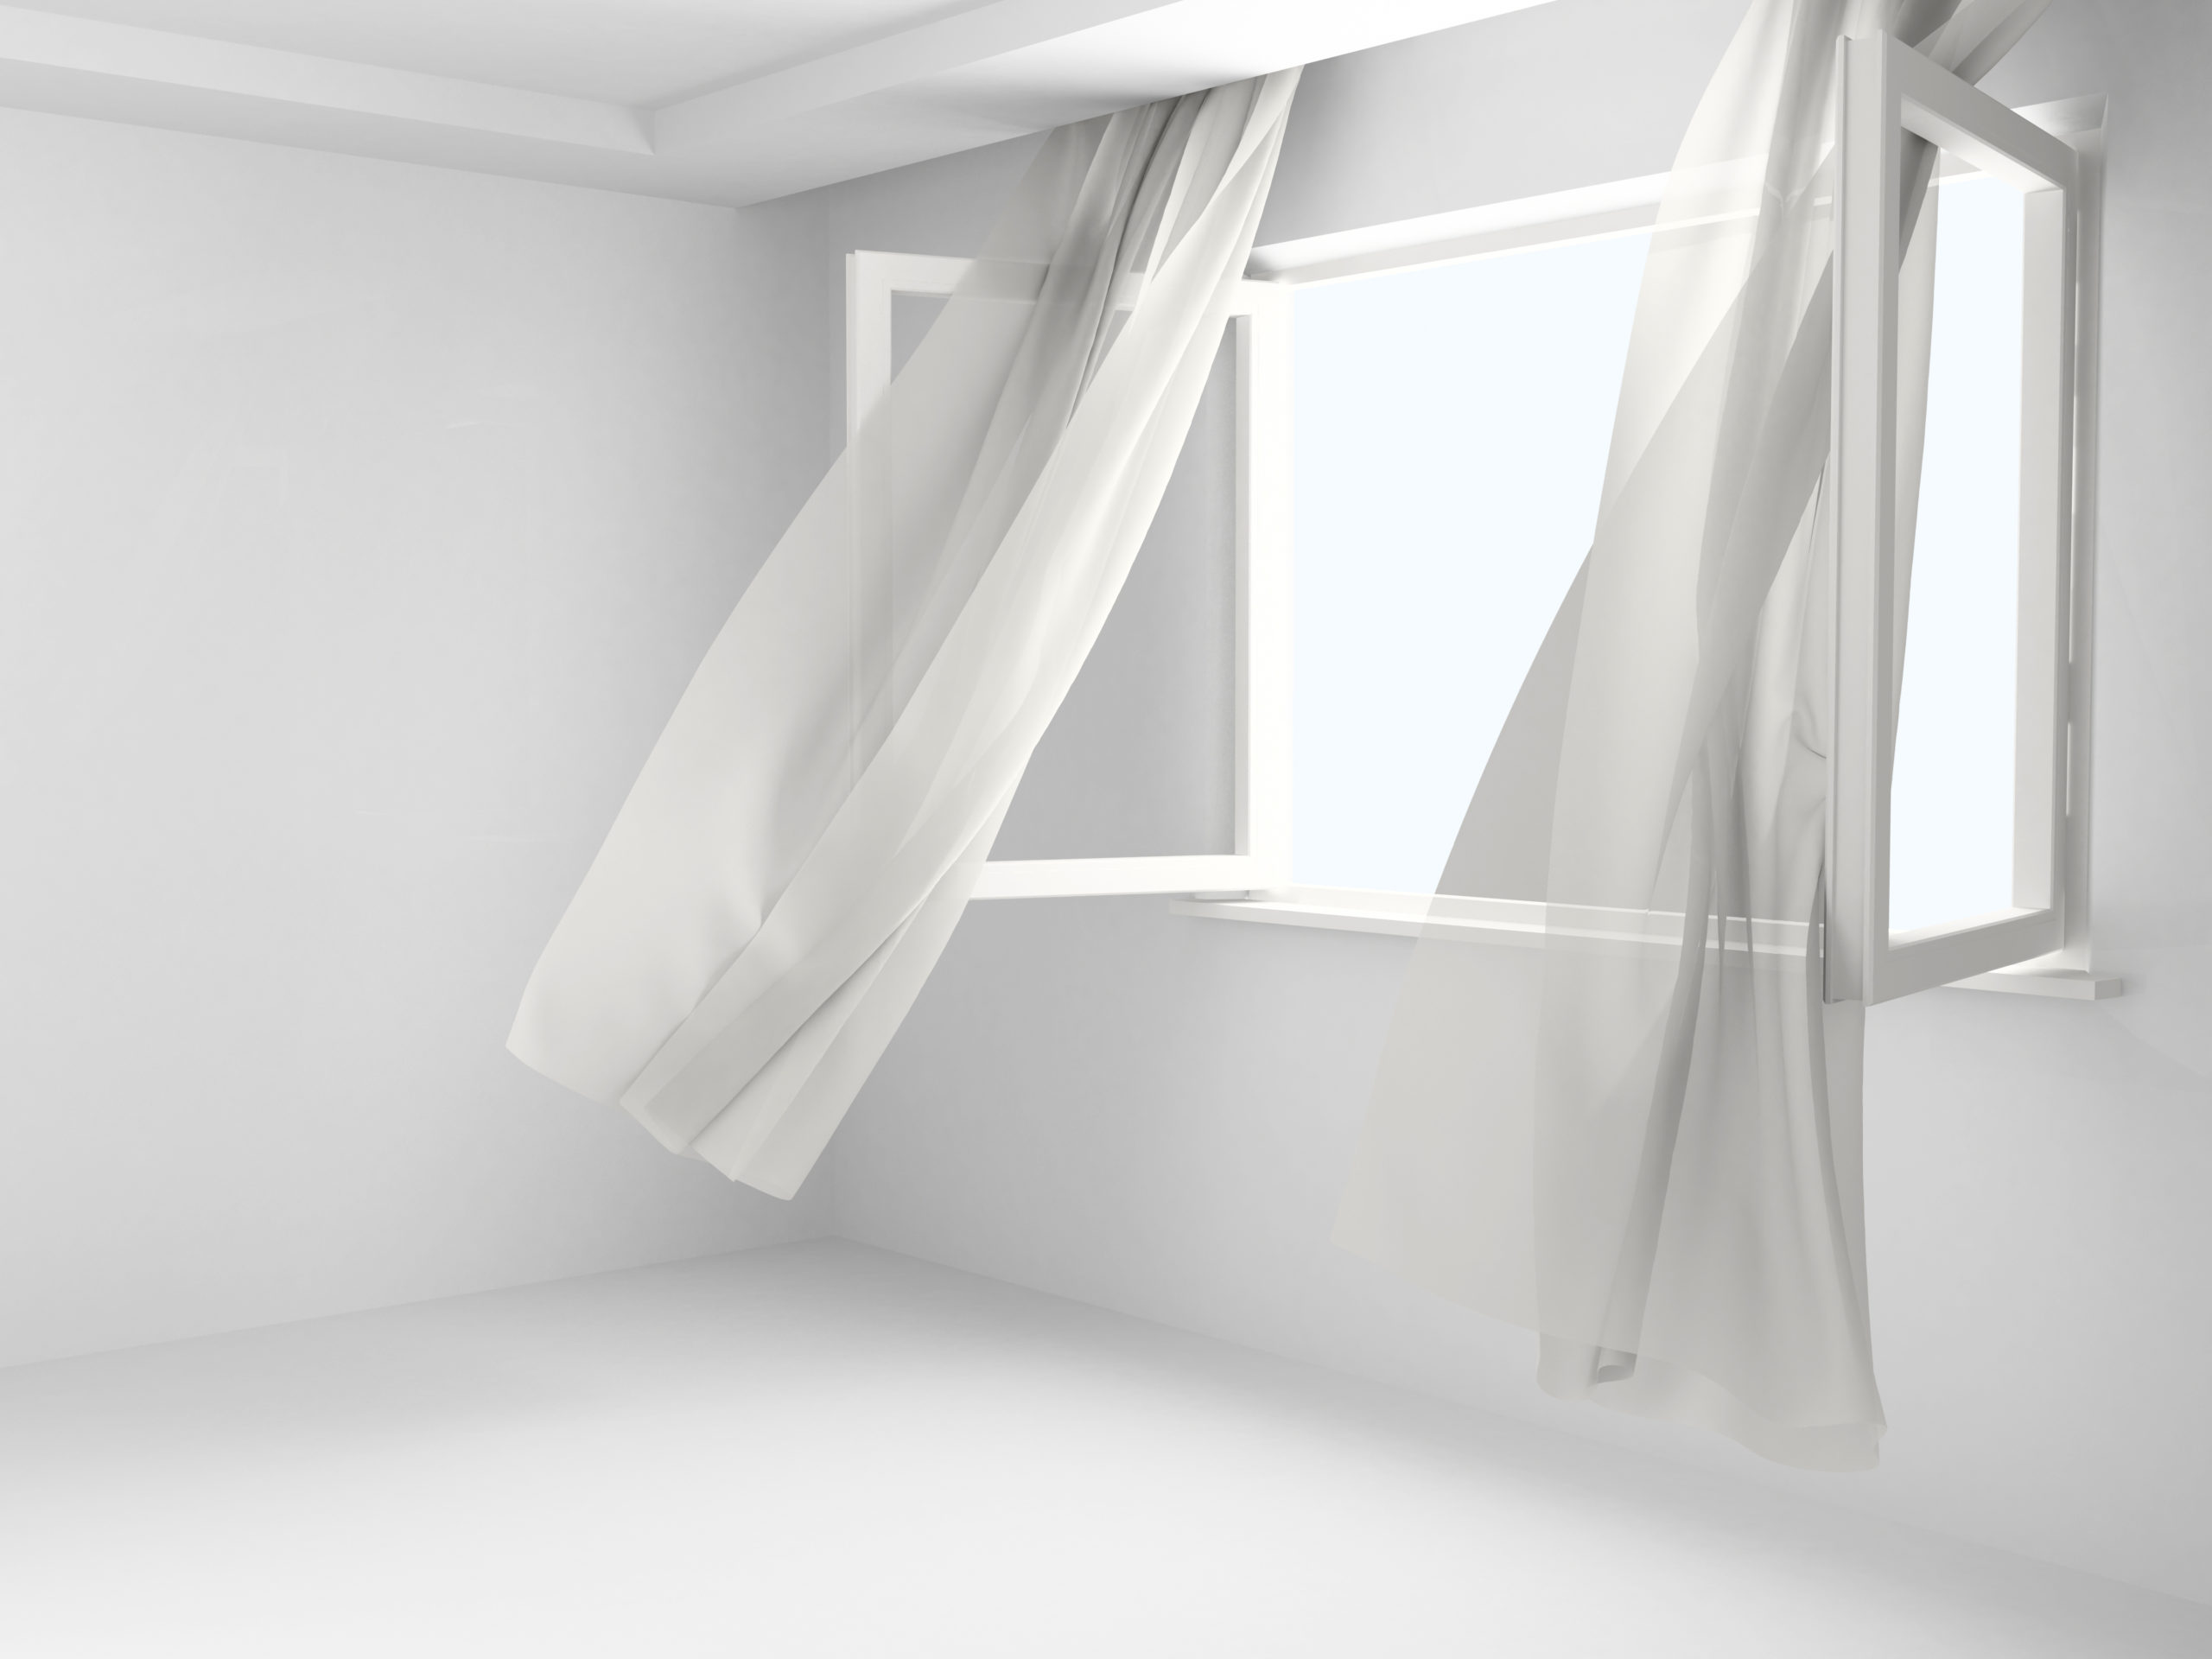 White room with an open window and curtains blowing